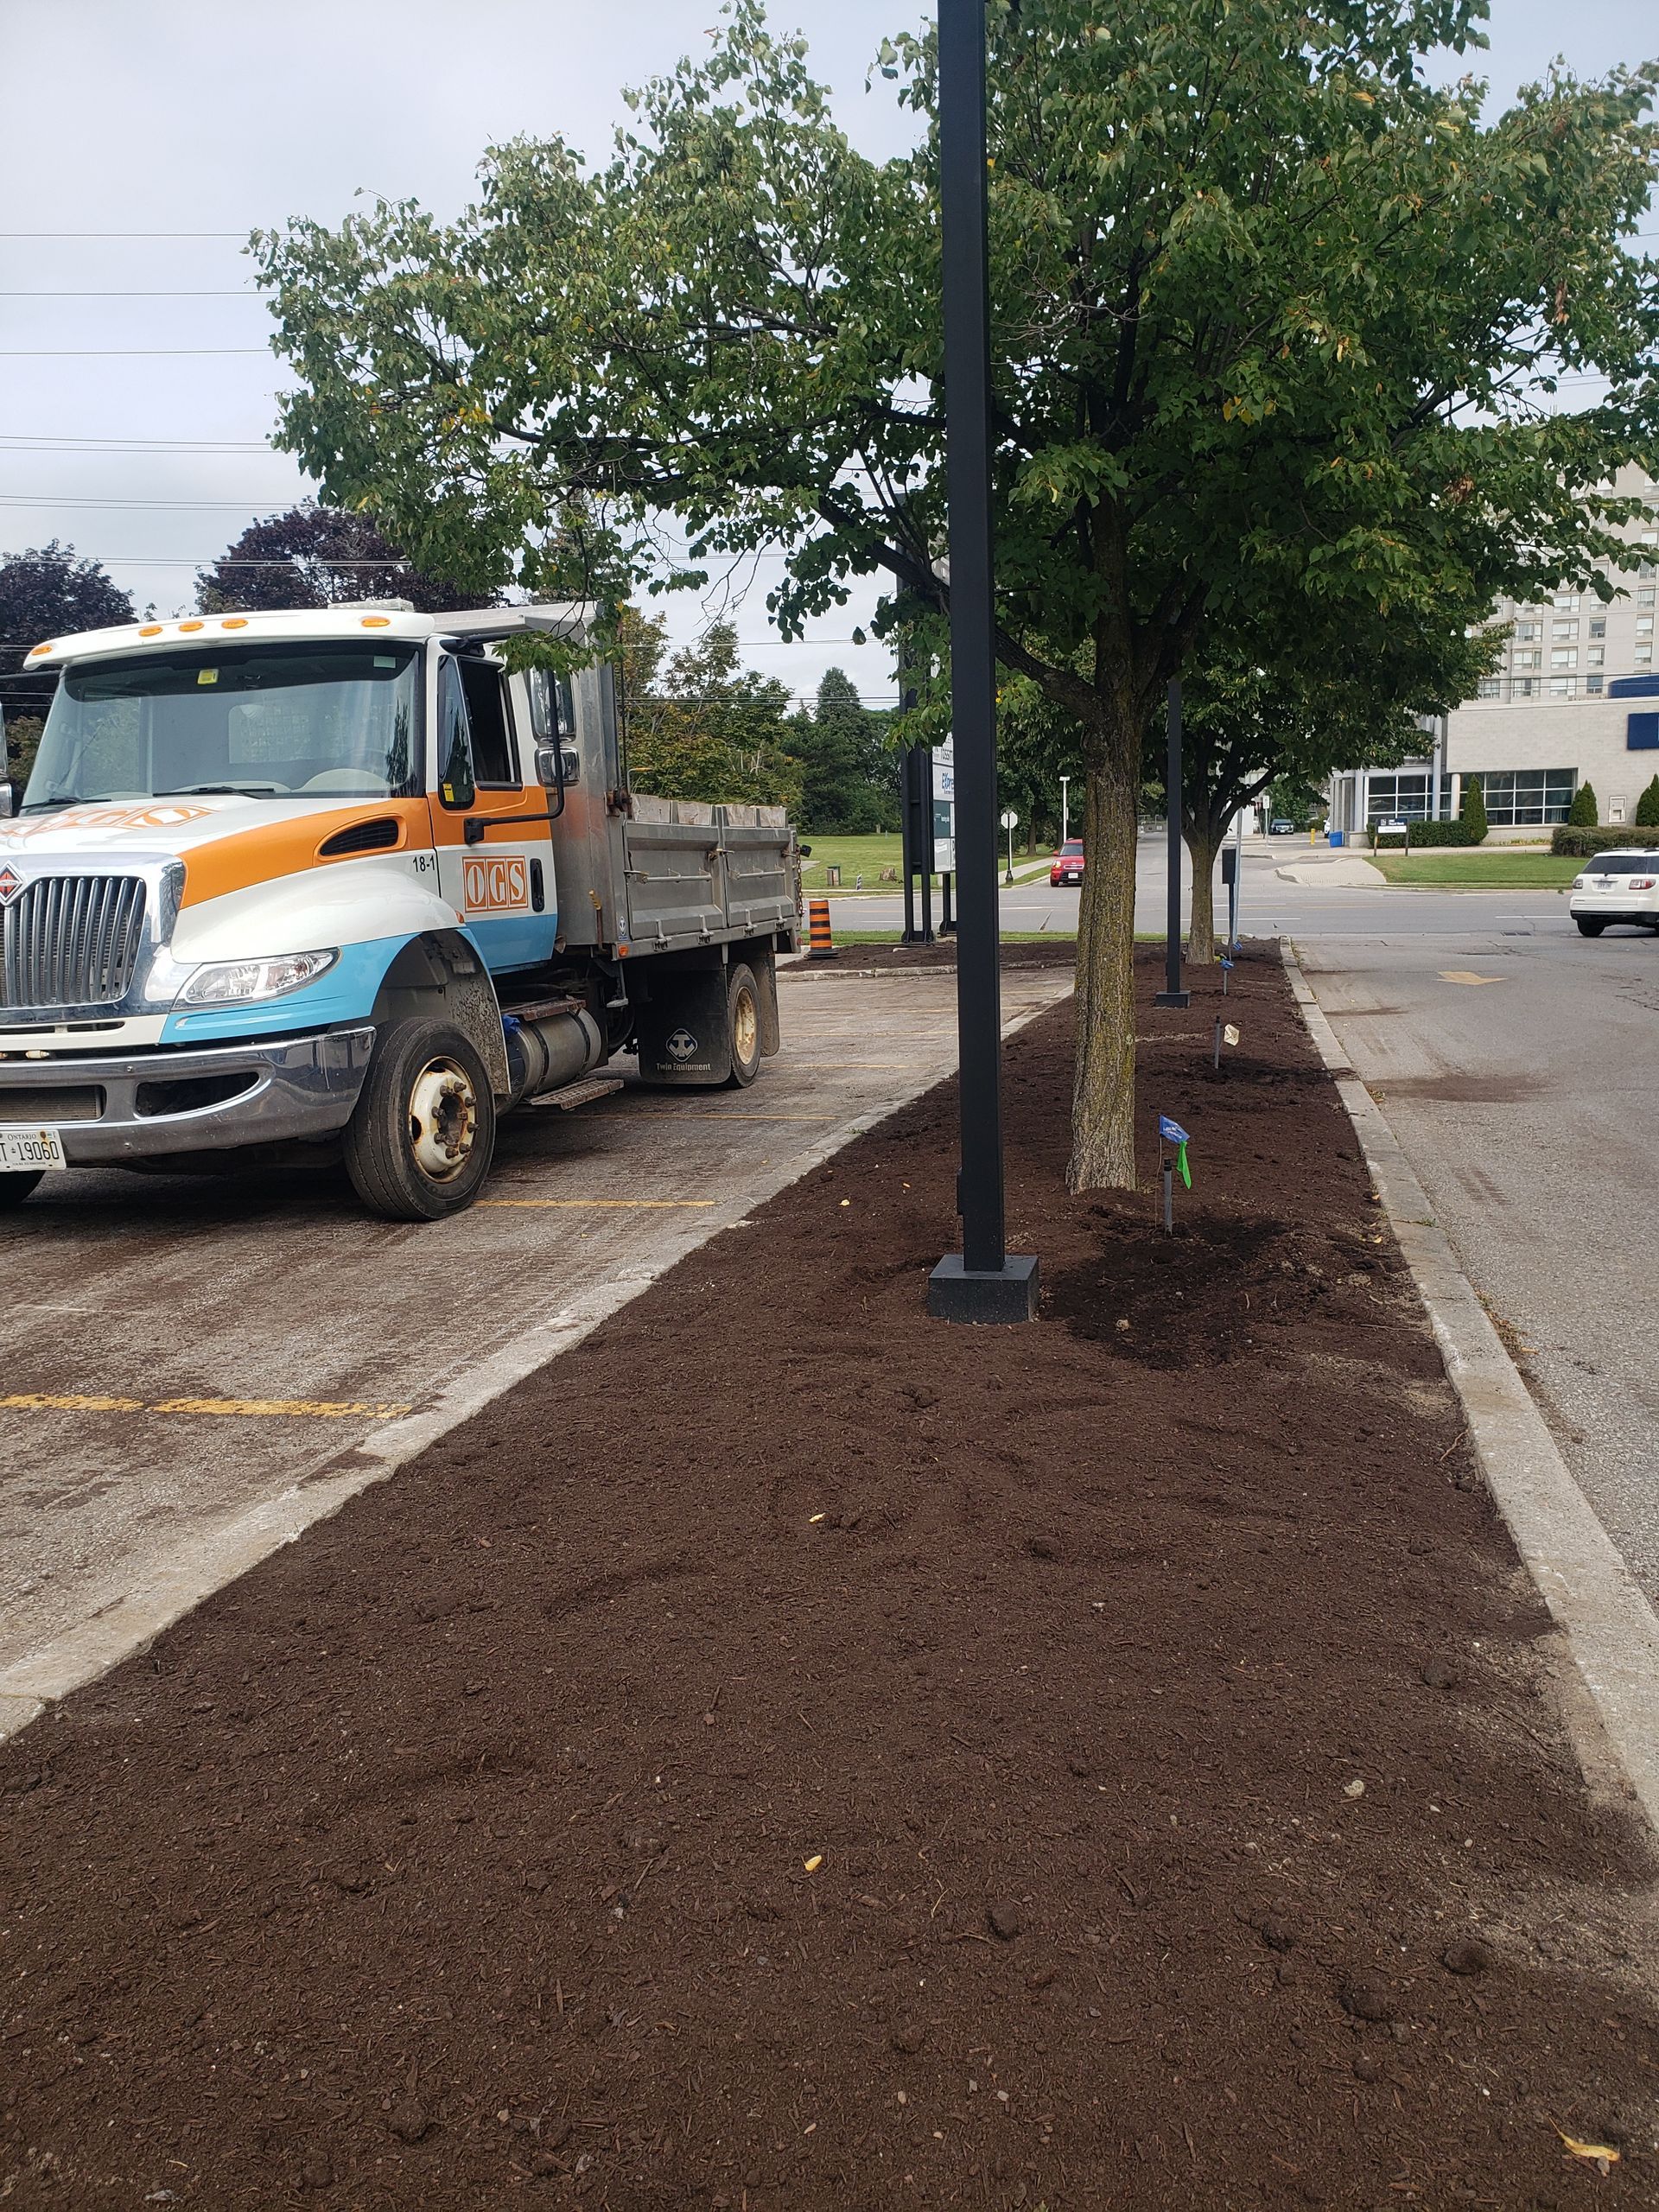 OGS truck in front of large commercial mulch job